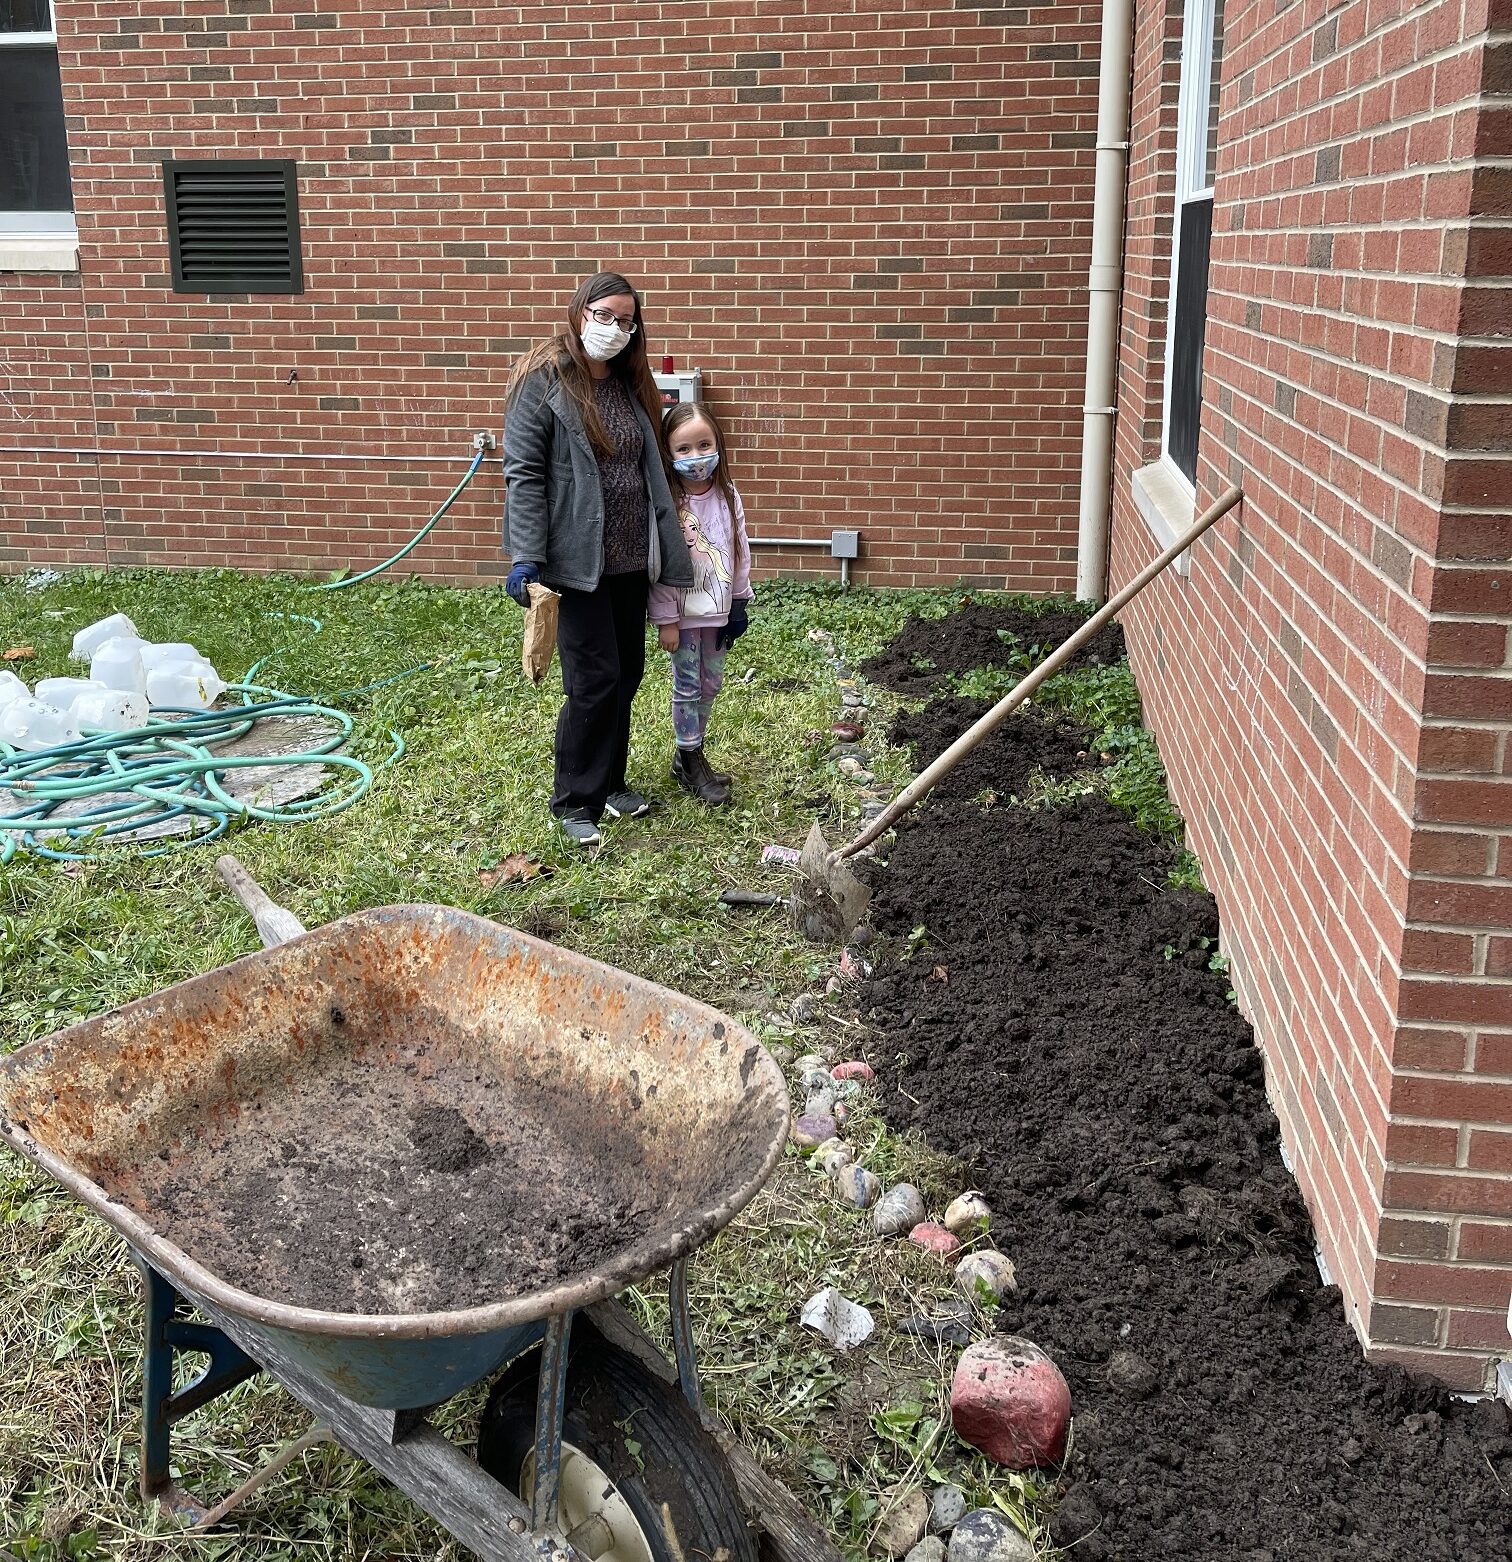 a woman and a young girl standing in the school courtyard with a shovel leaning on the wall and a wheelbarrow in the foreground